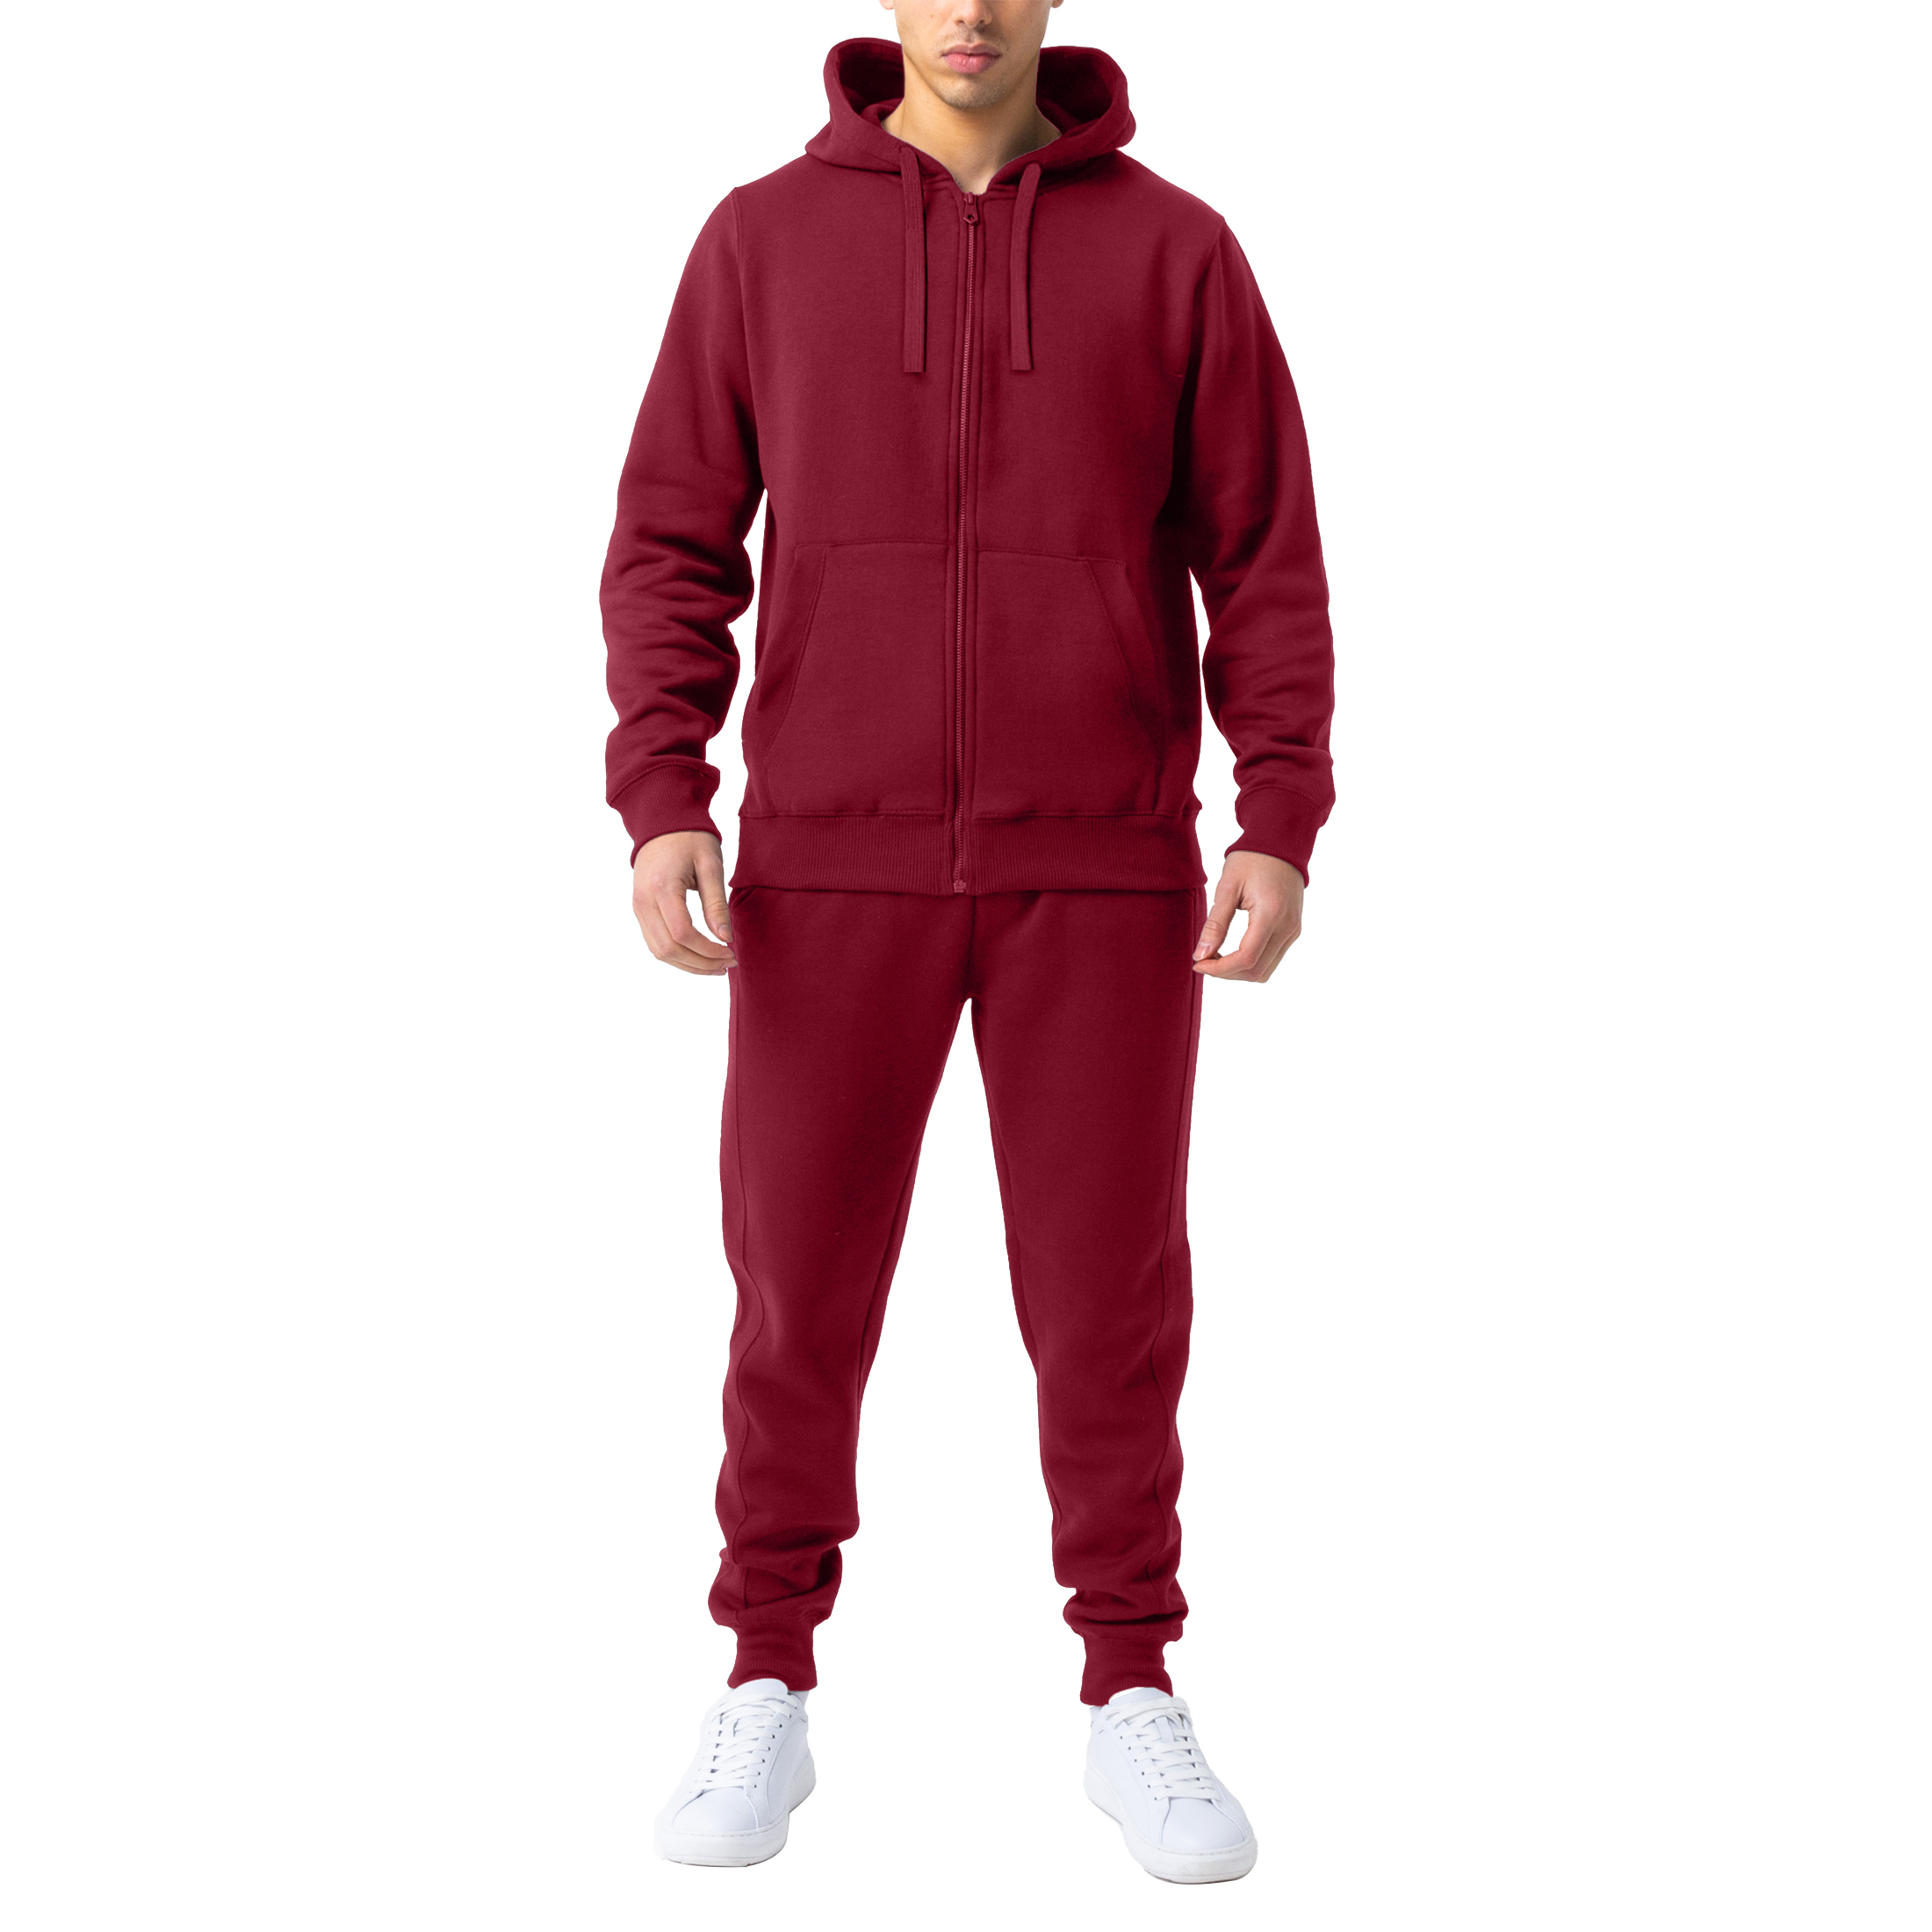 Men's Casual Jogging Athletic Active Full Zip Up Tracksuit - Red, 4X-Large